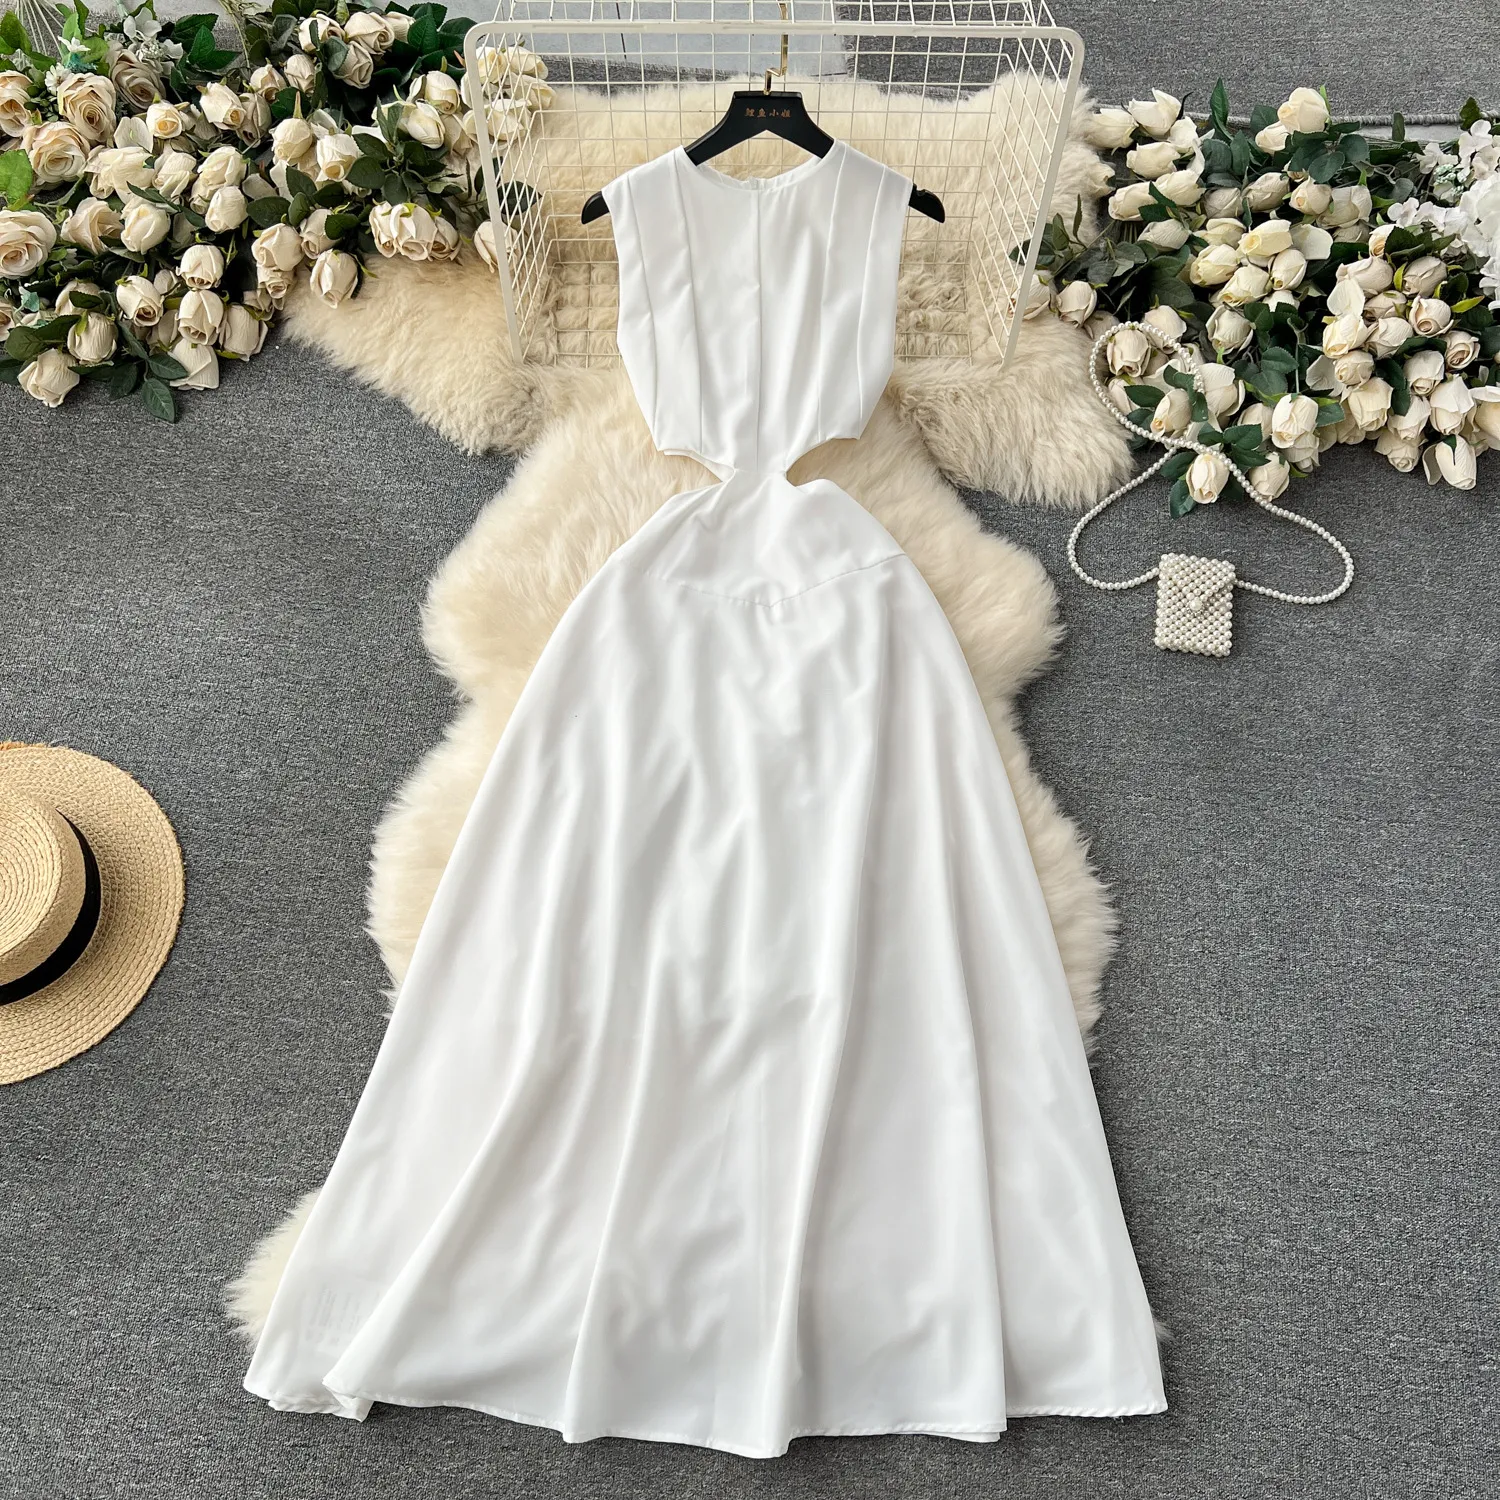 White formal dress, high-end exquisite and stylish dress for women, niche and unique hollowed out waist style, large swing long skirt